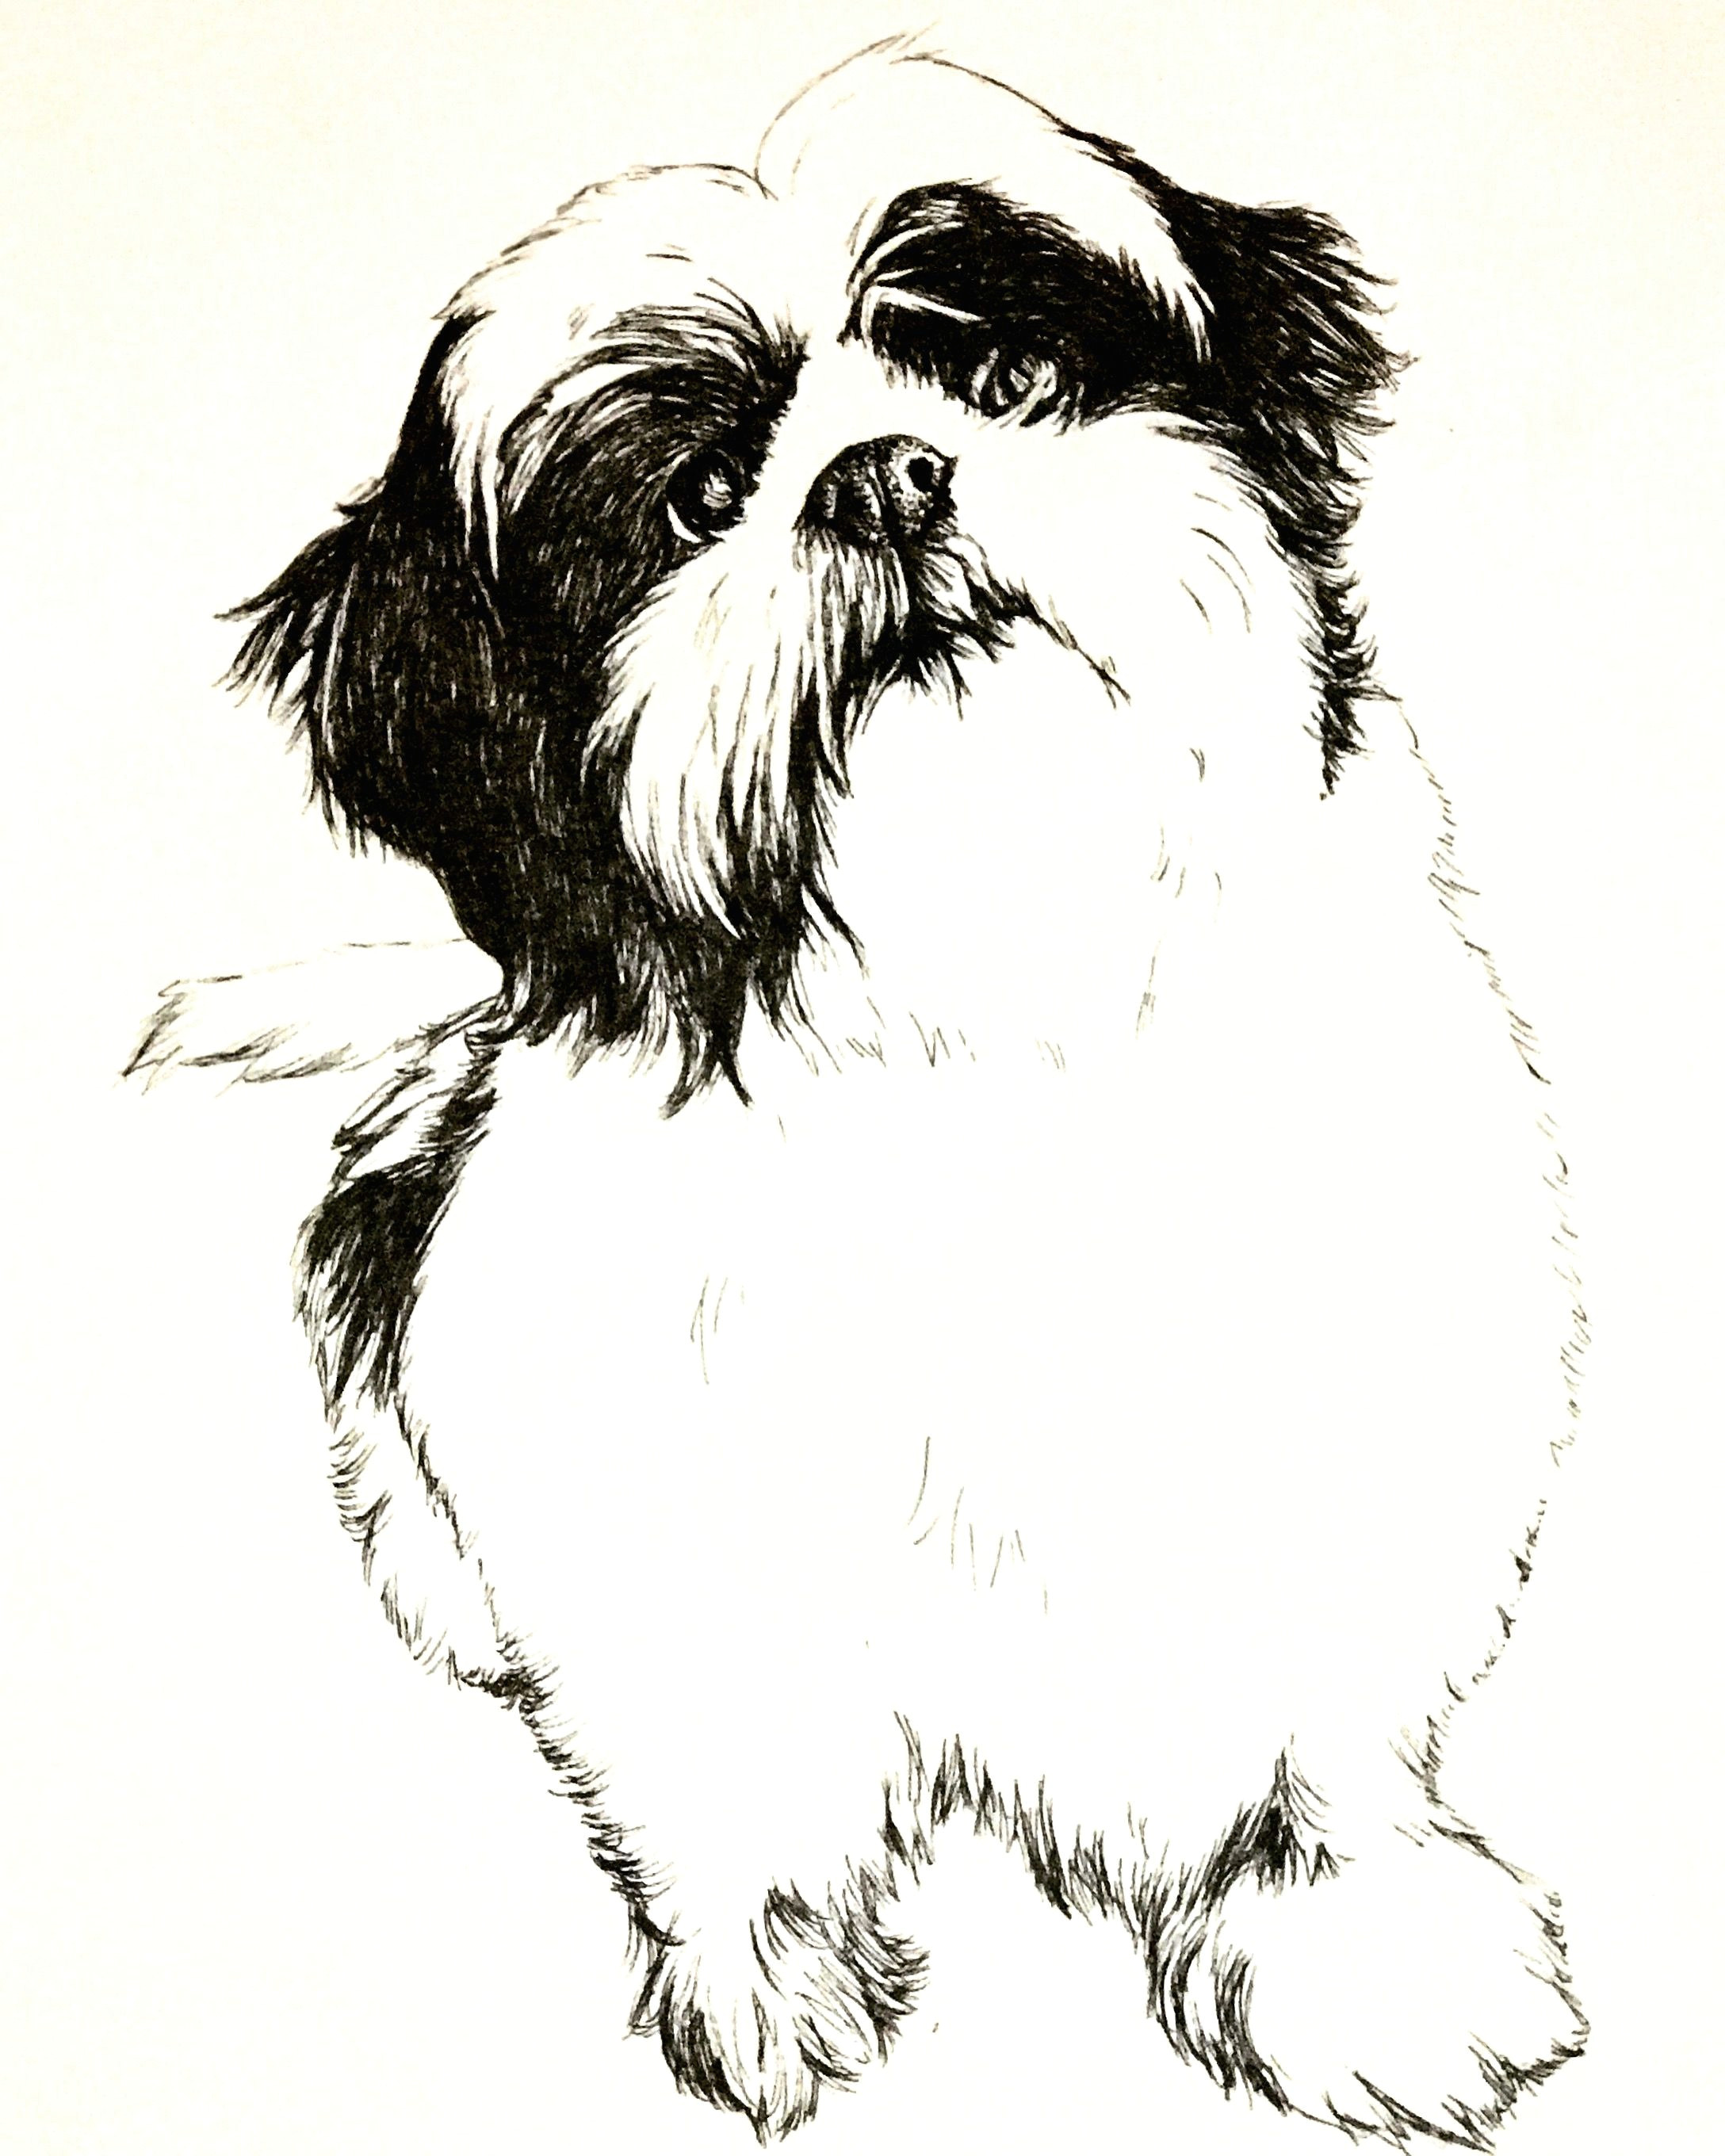 Drawing Of My Dog My Shih Tzu Puppy Zizou In Black Ink Pens This is An Idea for A